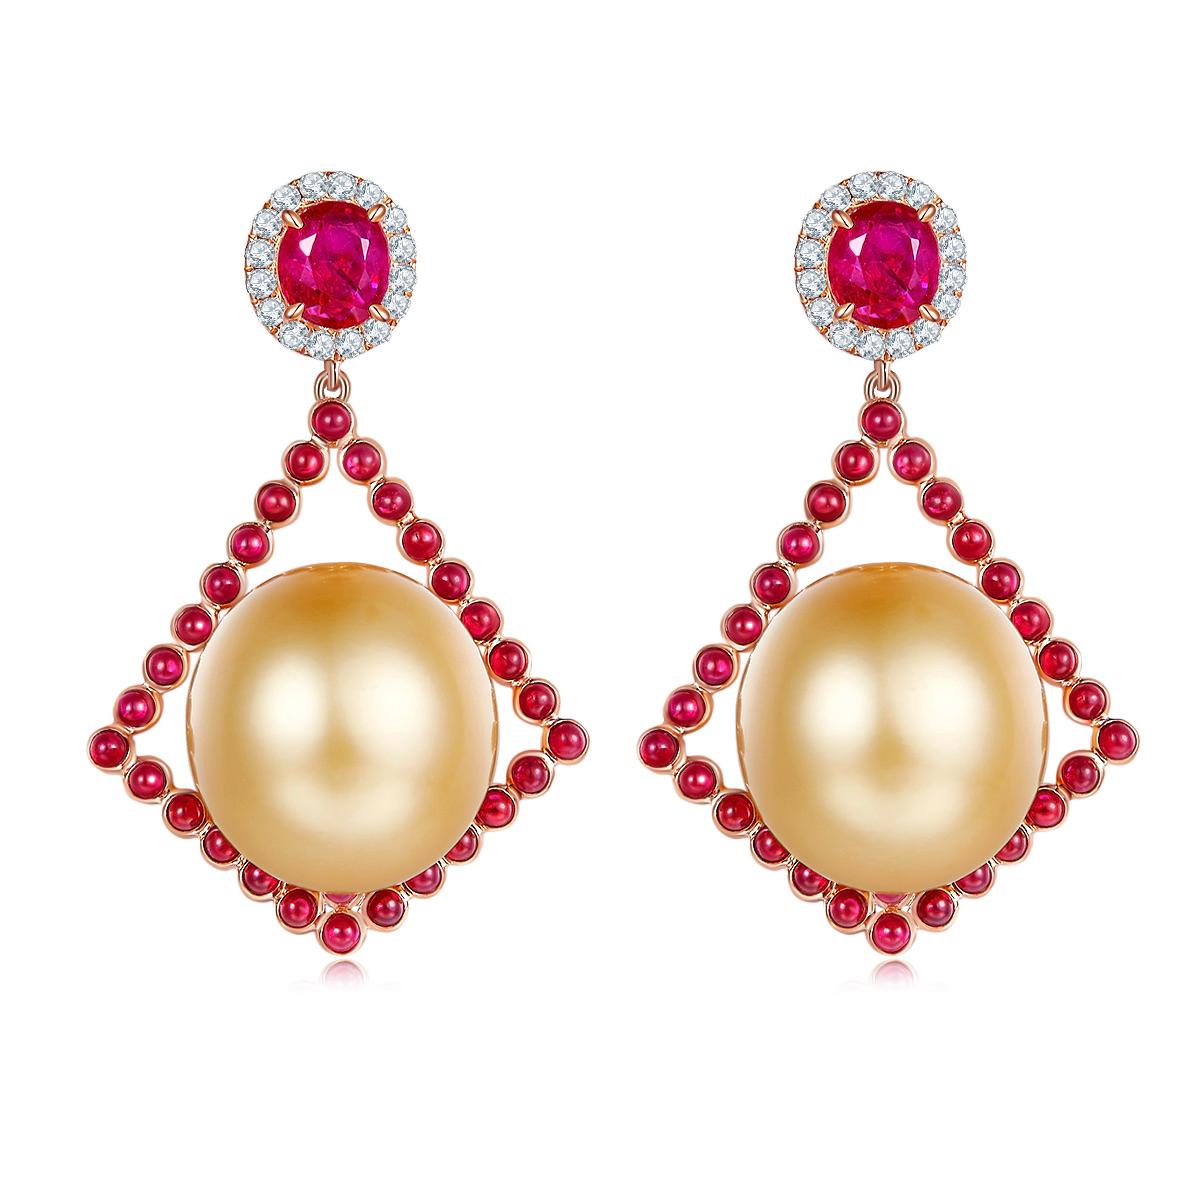 This is a pair of kite shape dangle Earring. The Golden South Sea Pearl is sitting on top of the kite geometric and surrounded by little rubies cabochon. It is then suspended below the oval shape faceted ruby, which is encrusted in a circle of